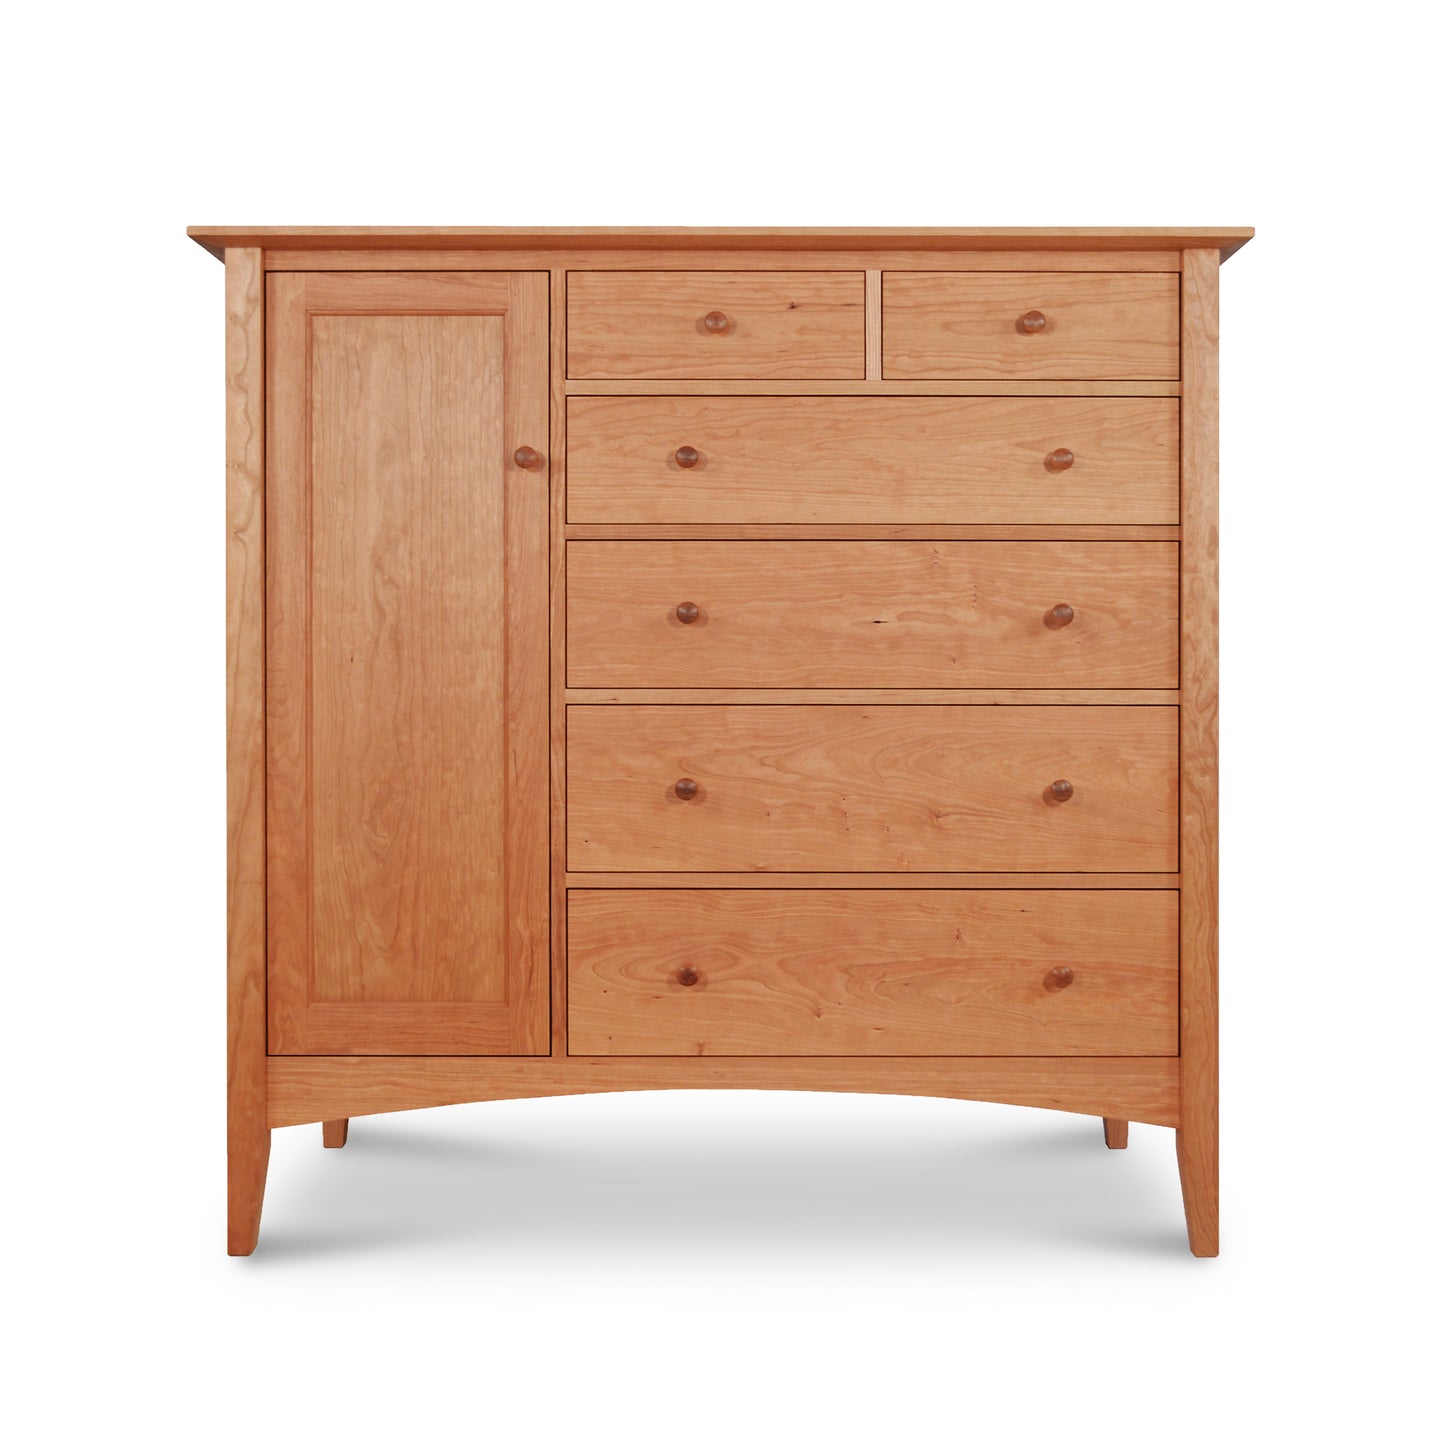 A Maple Corner Woodworks American Shaker Gent's Chest with a variety of drawers and a single cabinet door, isolated on a white background.